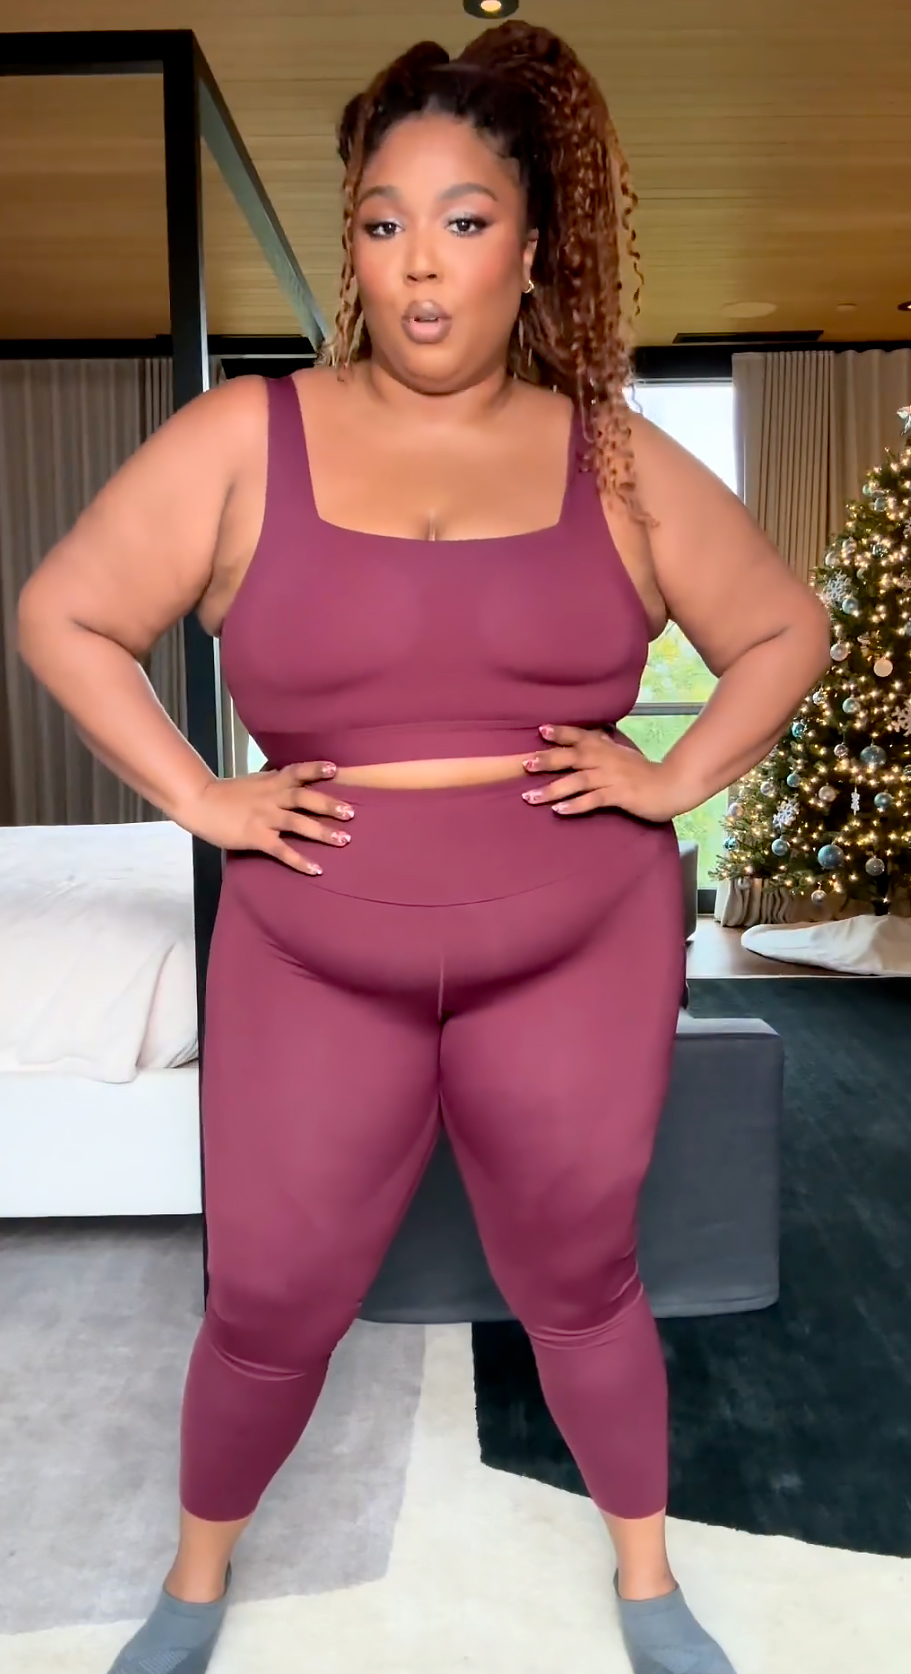 Lizzo Models Legging and Bra Set From Her Clothing Line Yitty- ‘New Year, New Me’